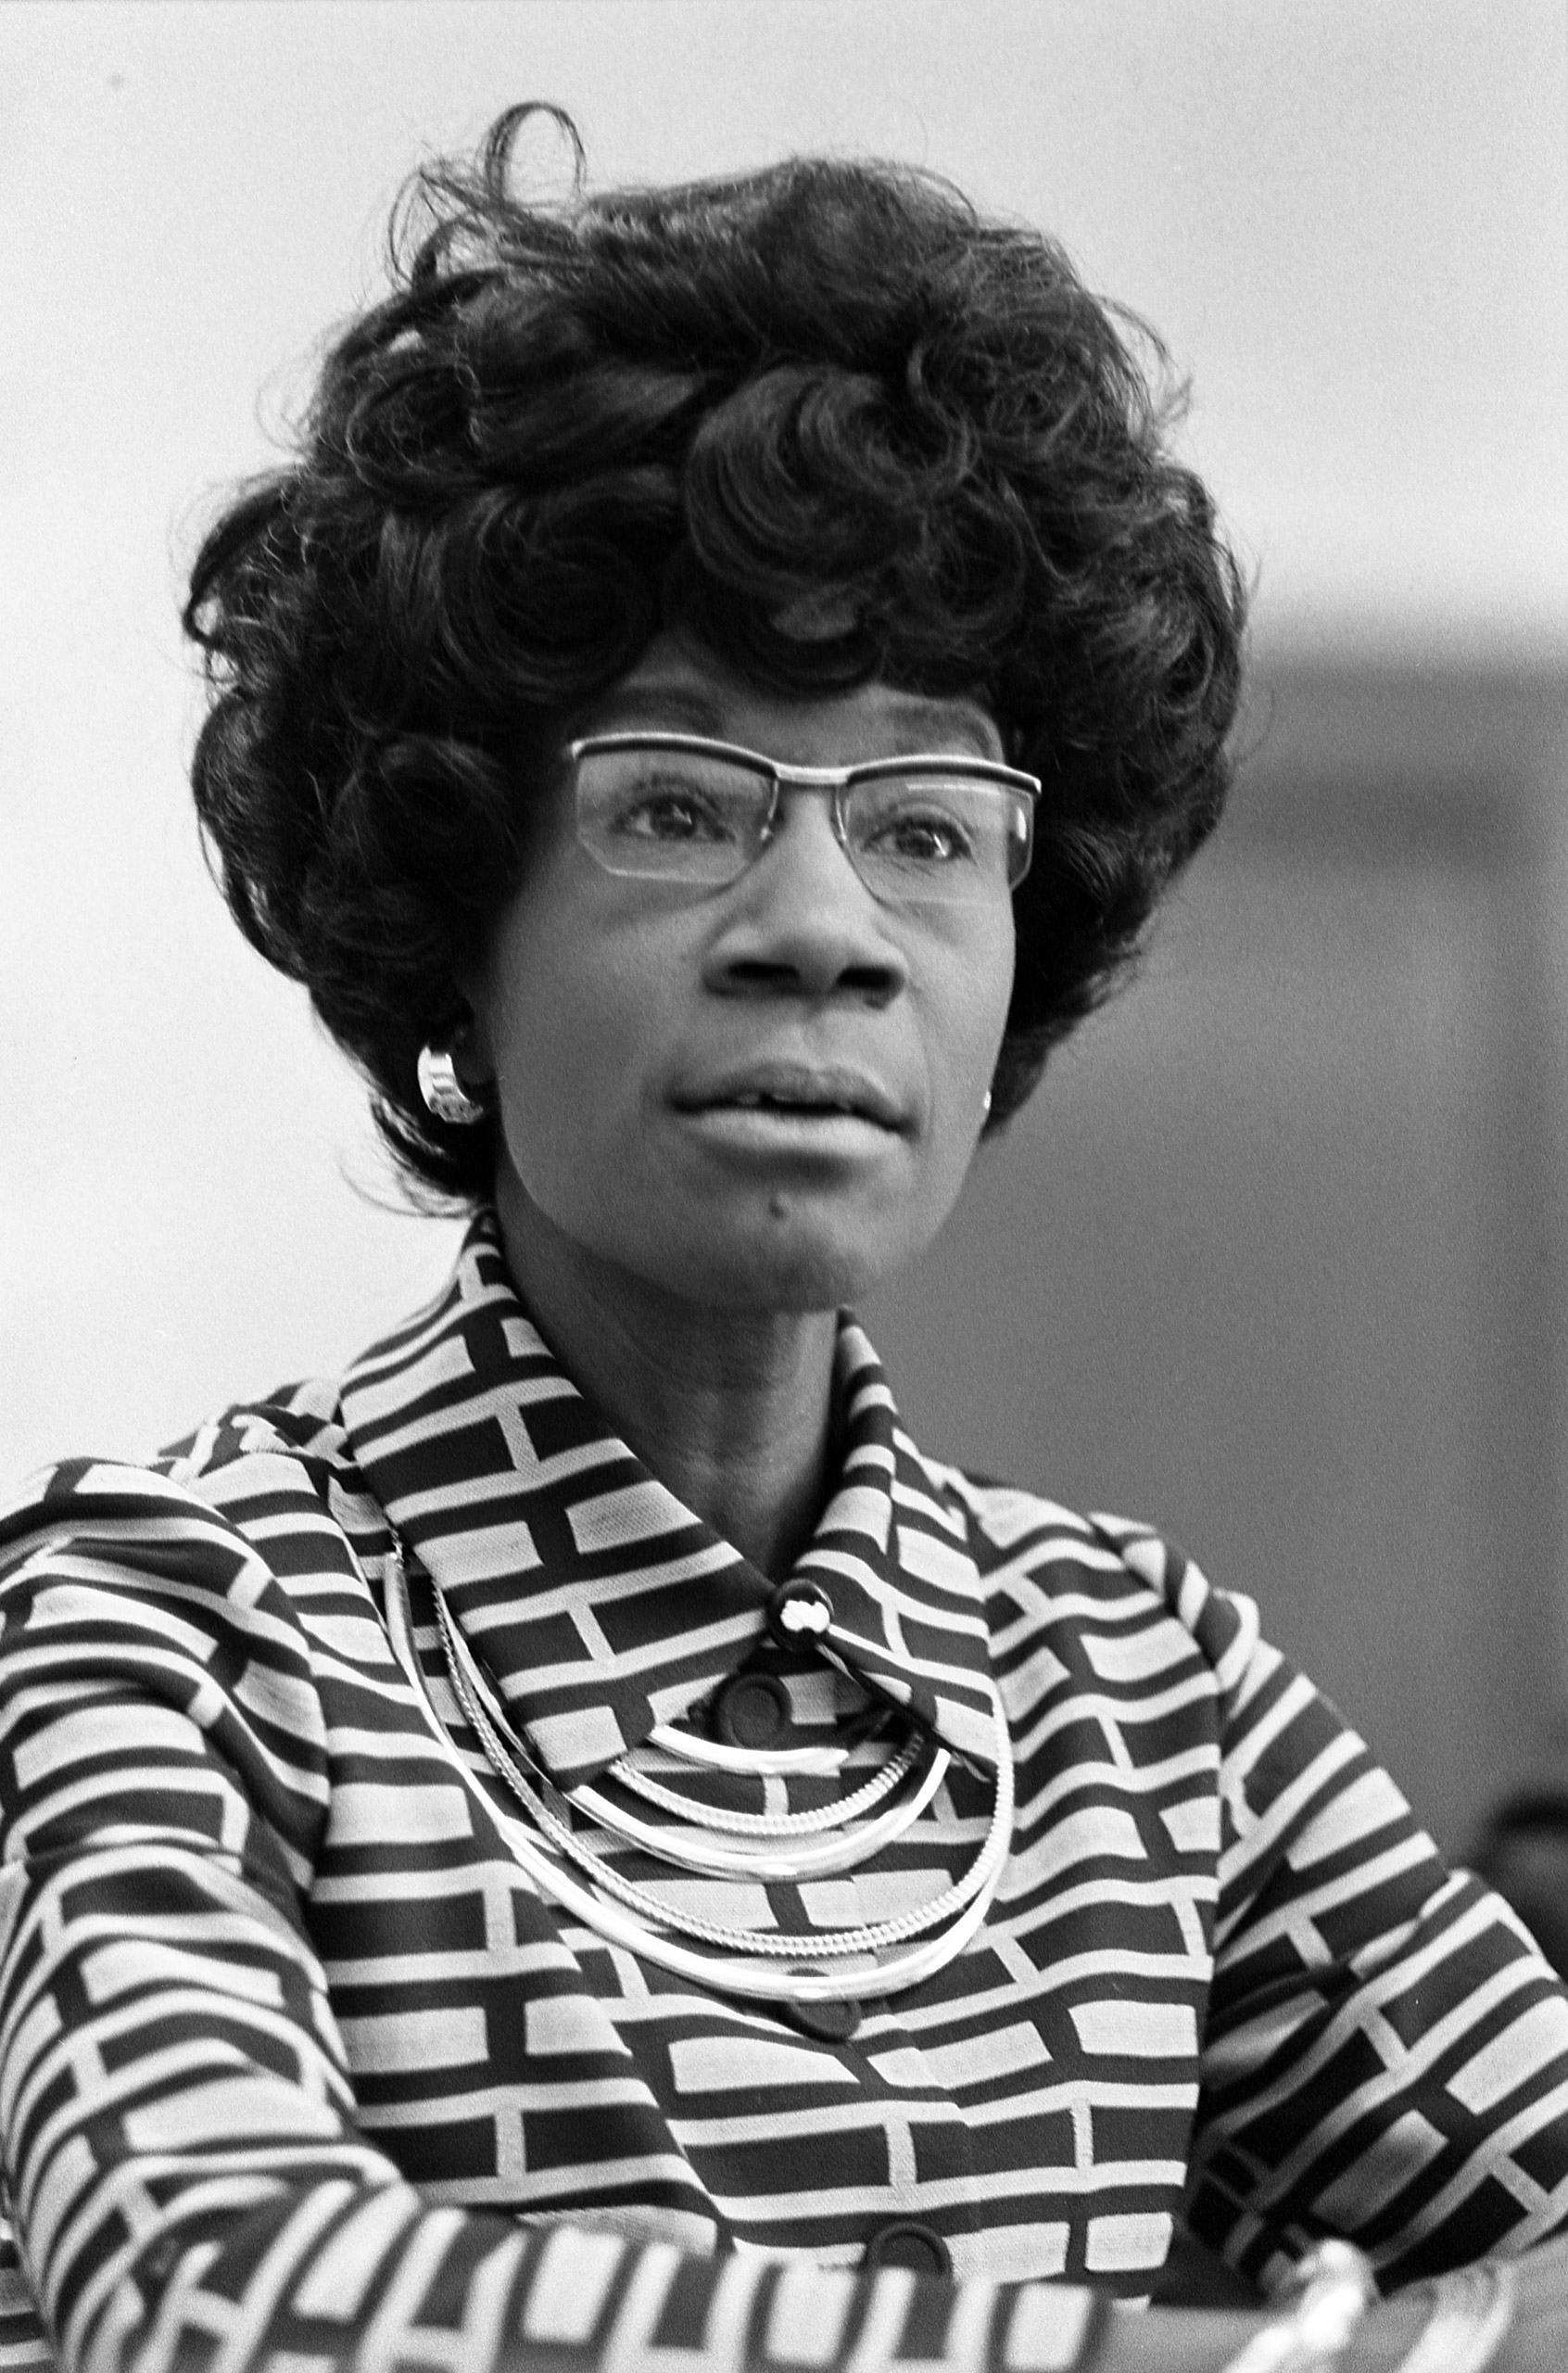 Congresswoman Shirley Chisholm announcing her candidacy for presidential nomination, January 1972.